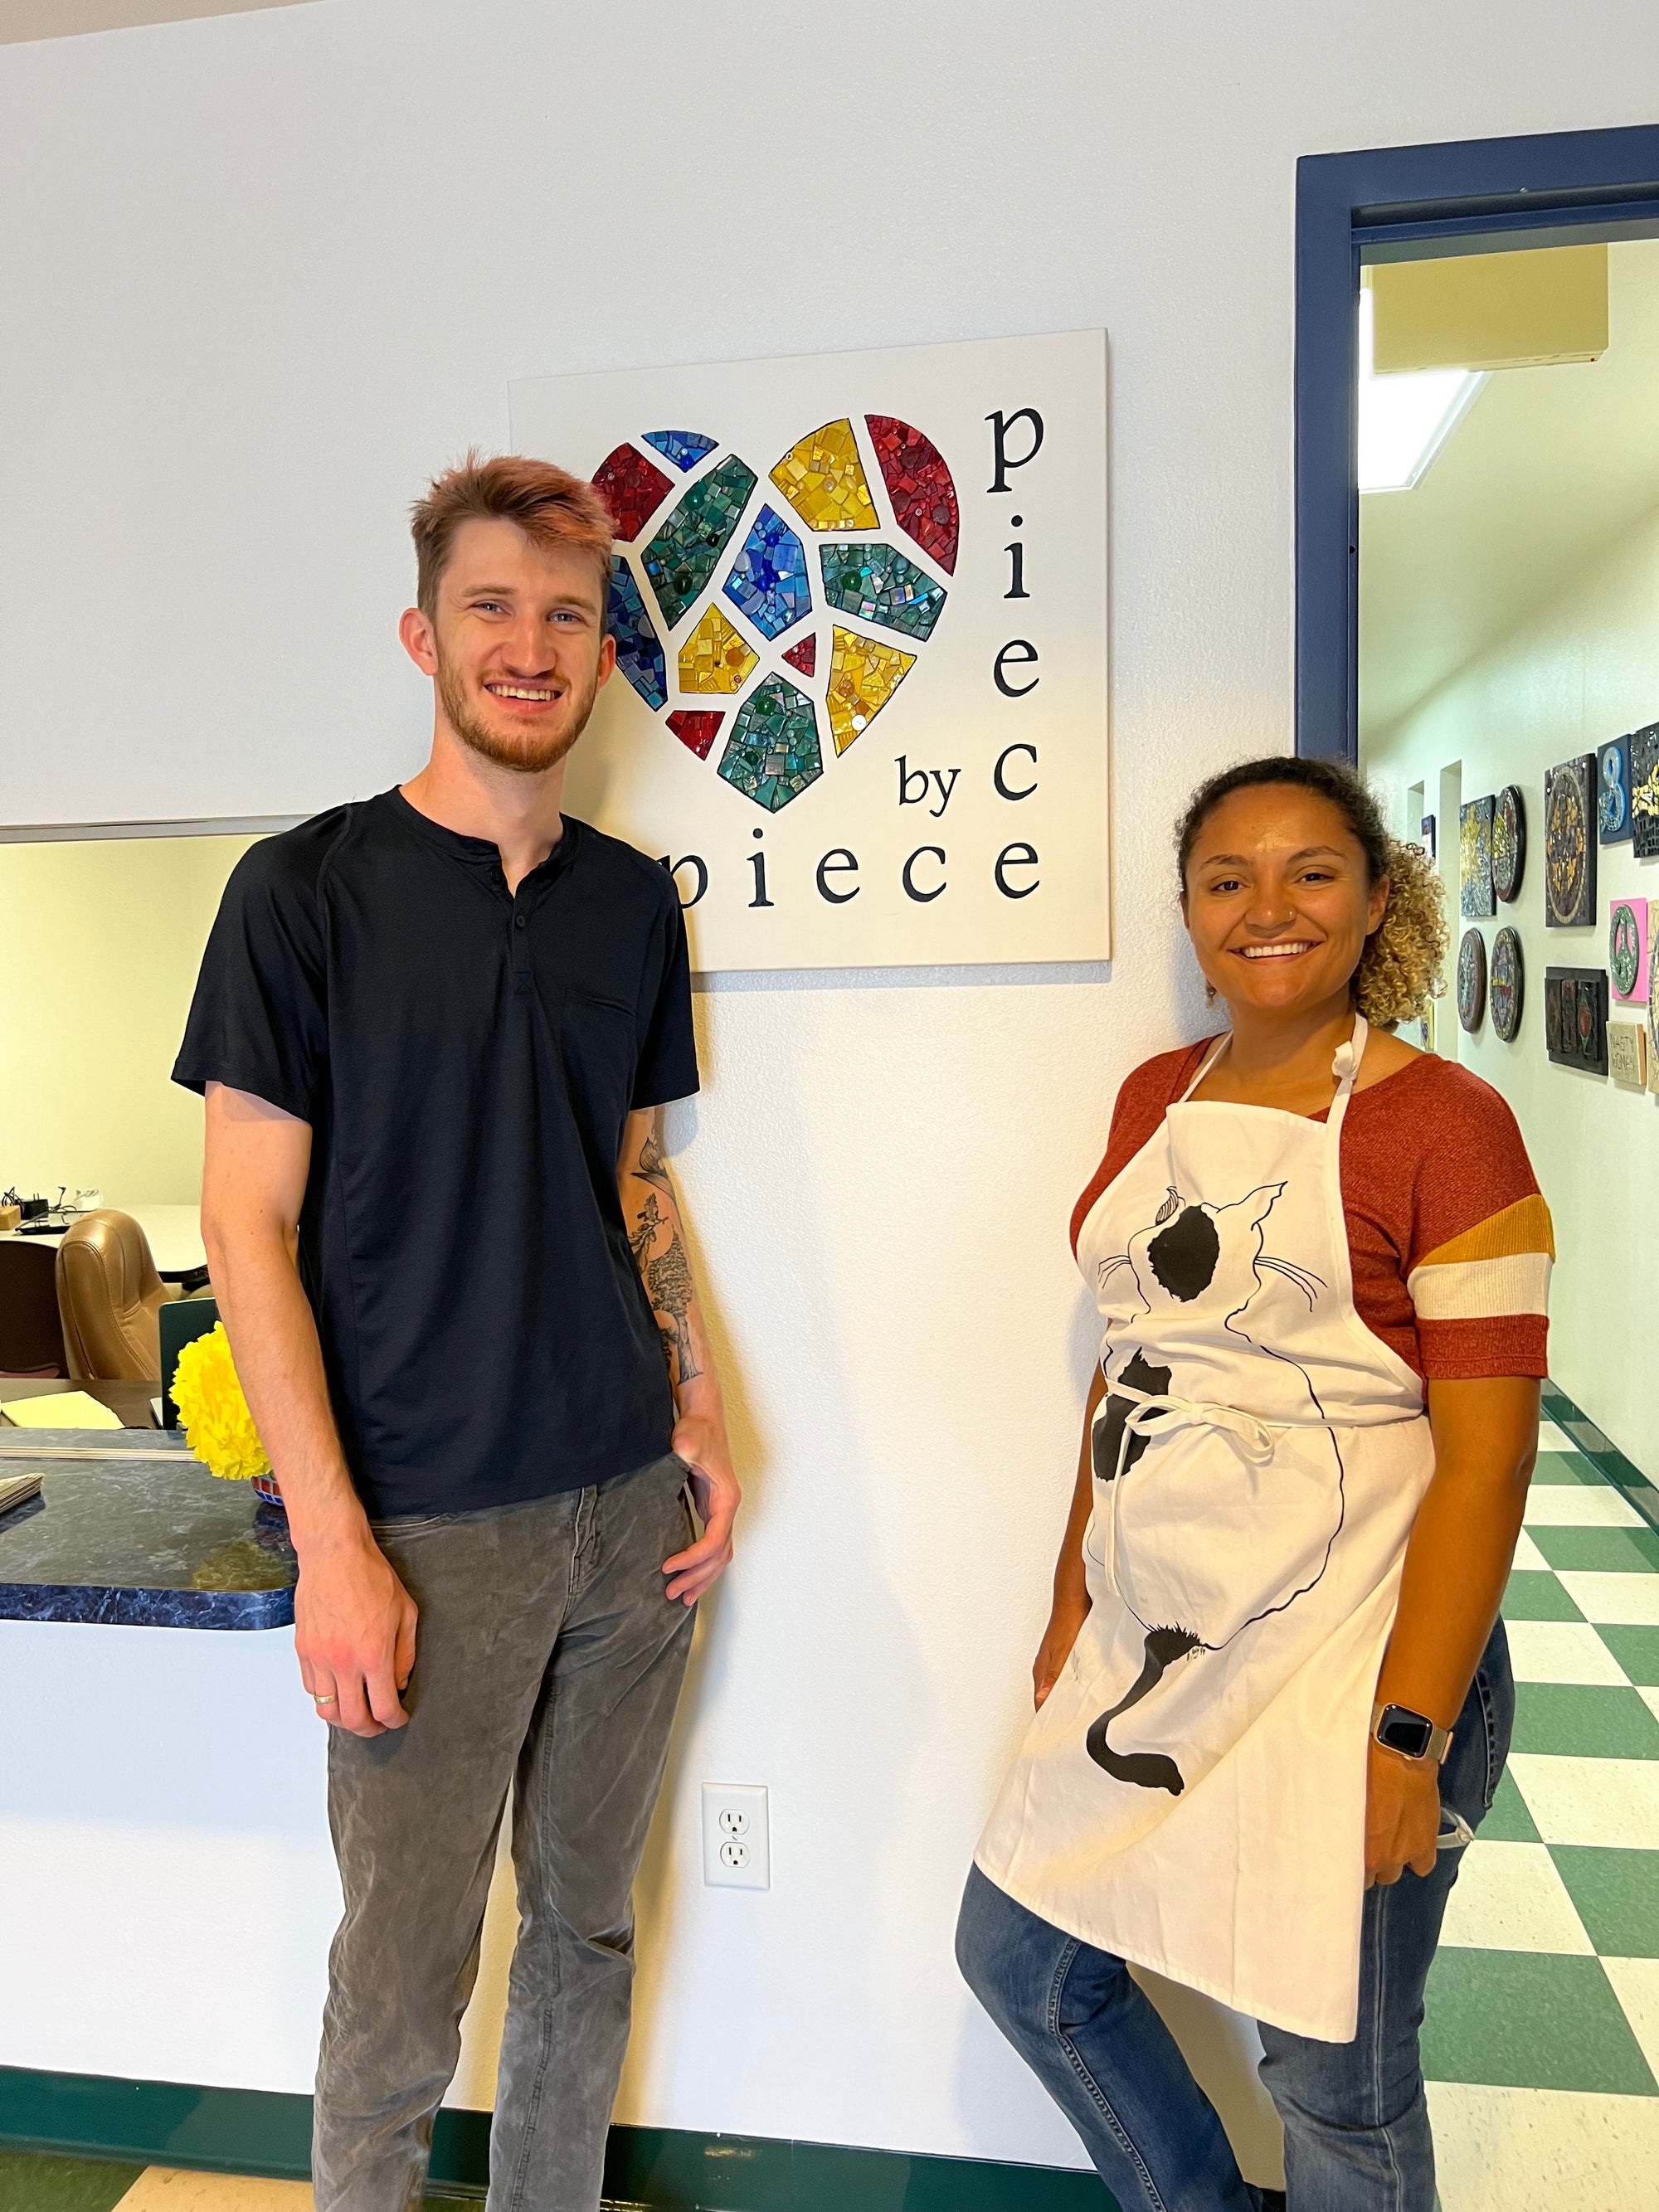 Two new employees stand near a mosaic of the Piece by Piece logo.